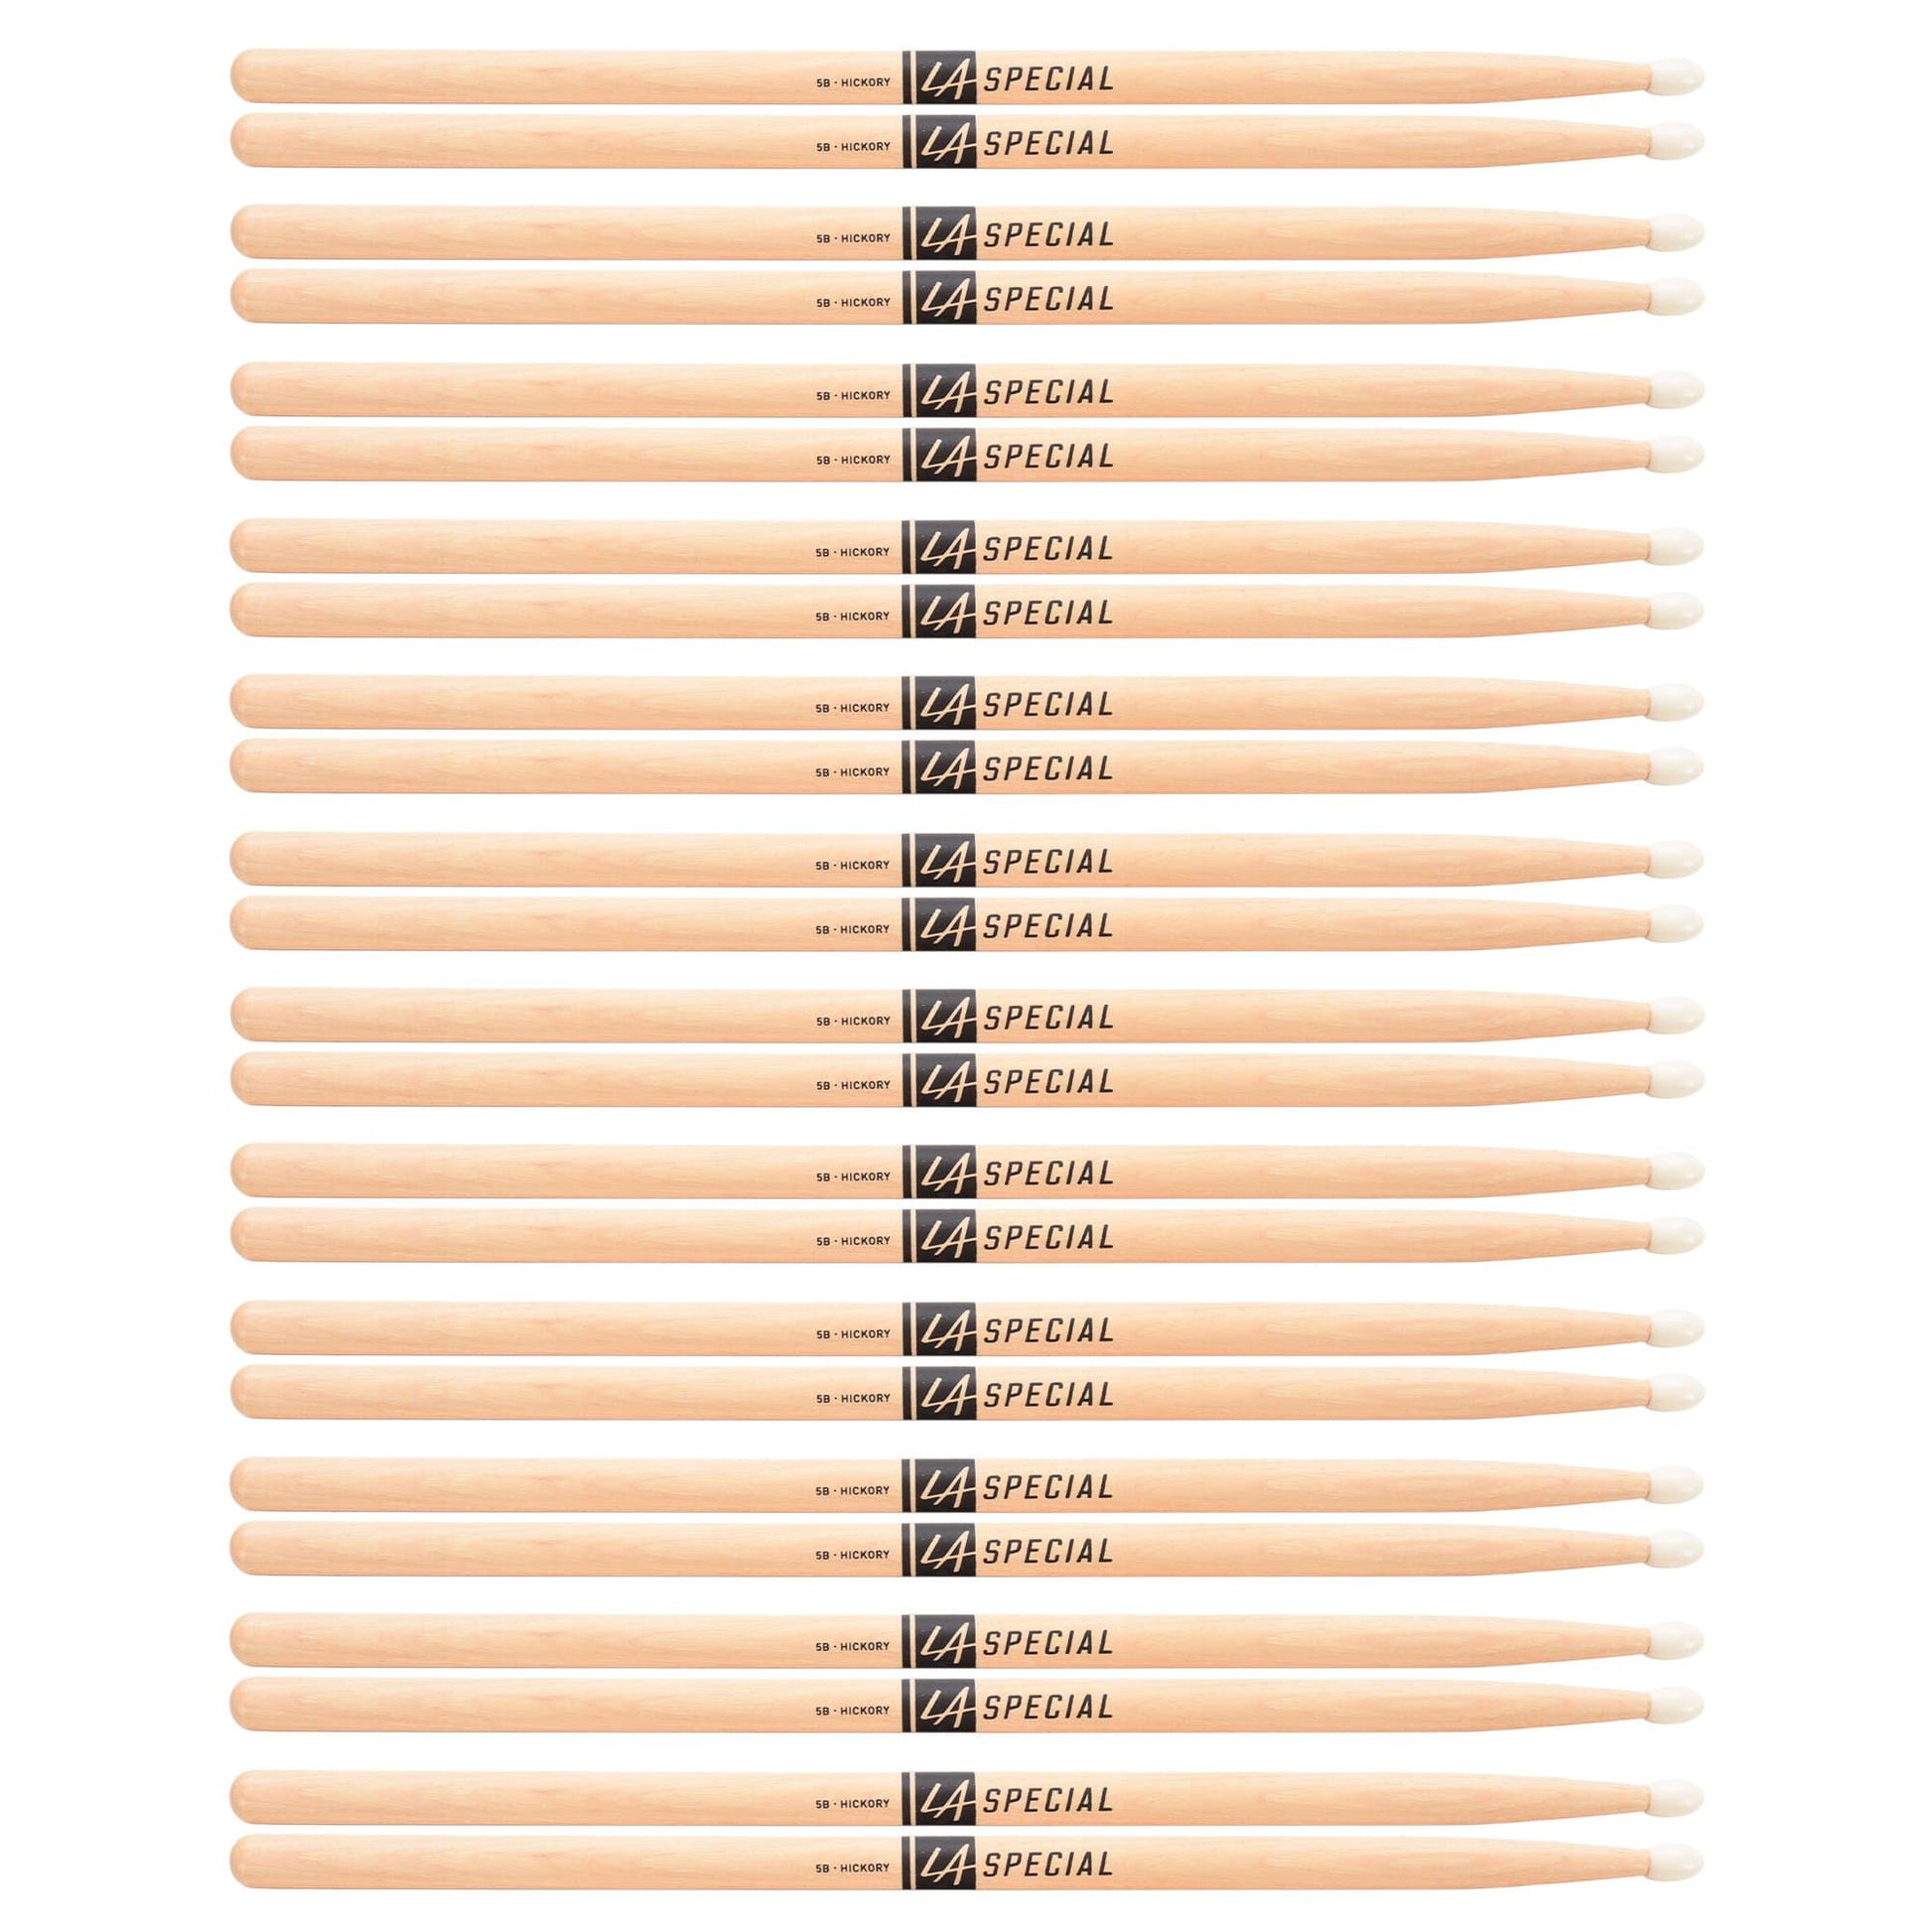 Promark LA Special 5B Nylon Tip Drum Sticks (12 Pair Bundle) Drums and Percussion / Parts and Accessories / Drum Sticks and Mallets